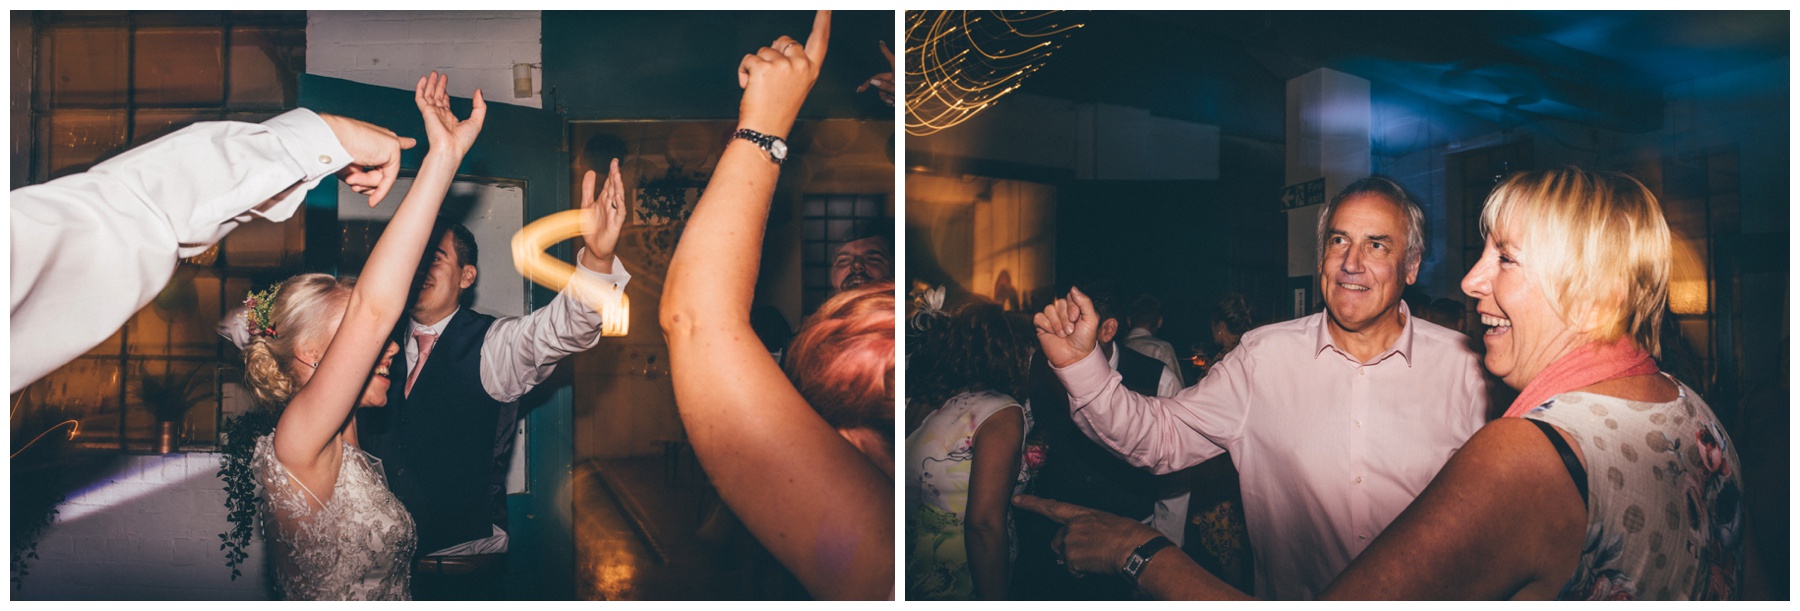 Guests dance at The Hide, a cool, Urban wedding venue in Sheffield.